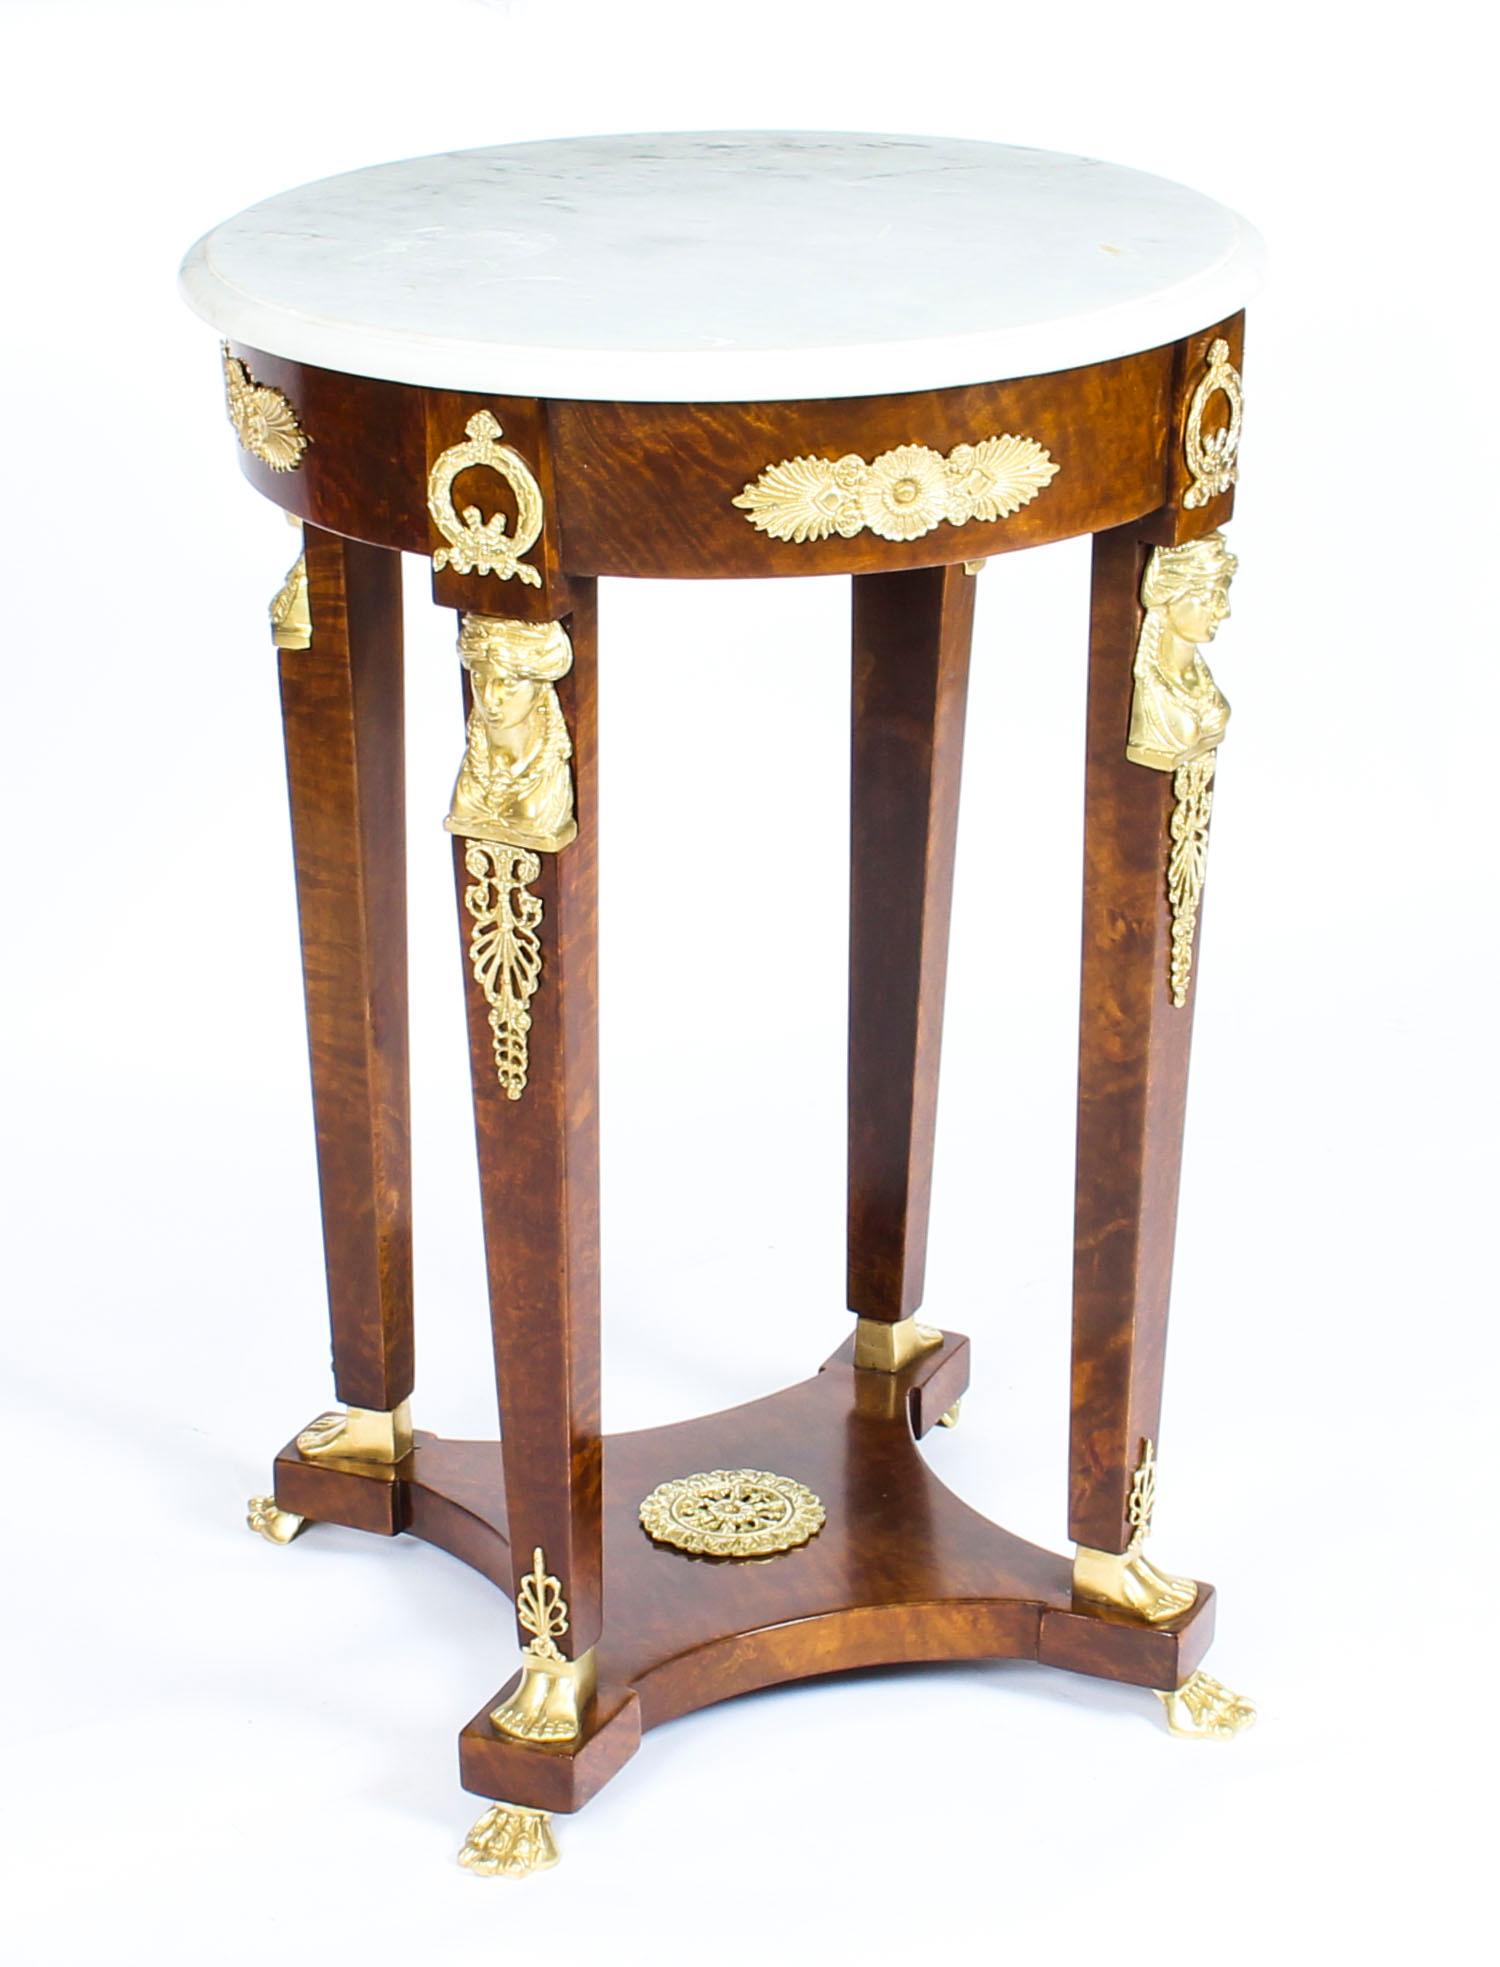 French Empire Revival Ormolu Mounted Guéridon Occasional Table, 19th Century 10